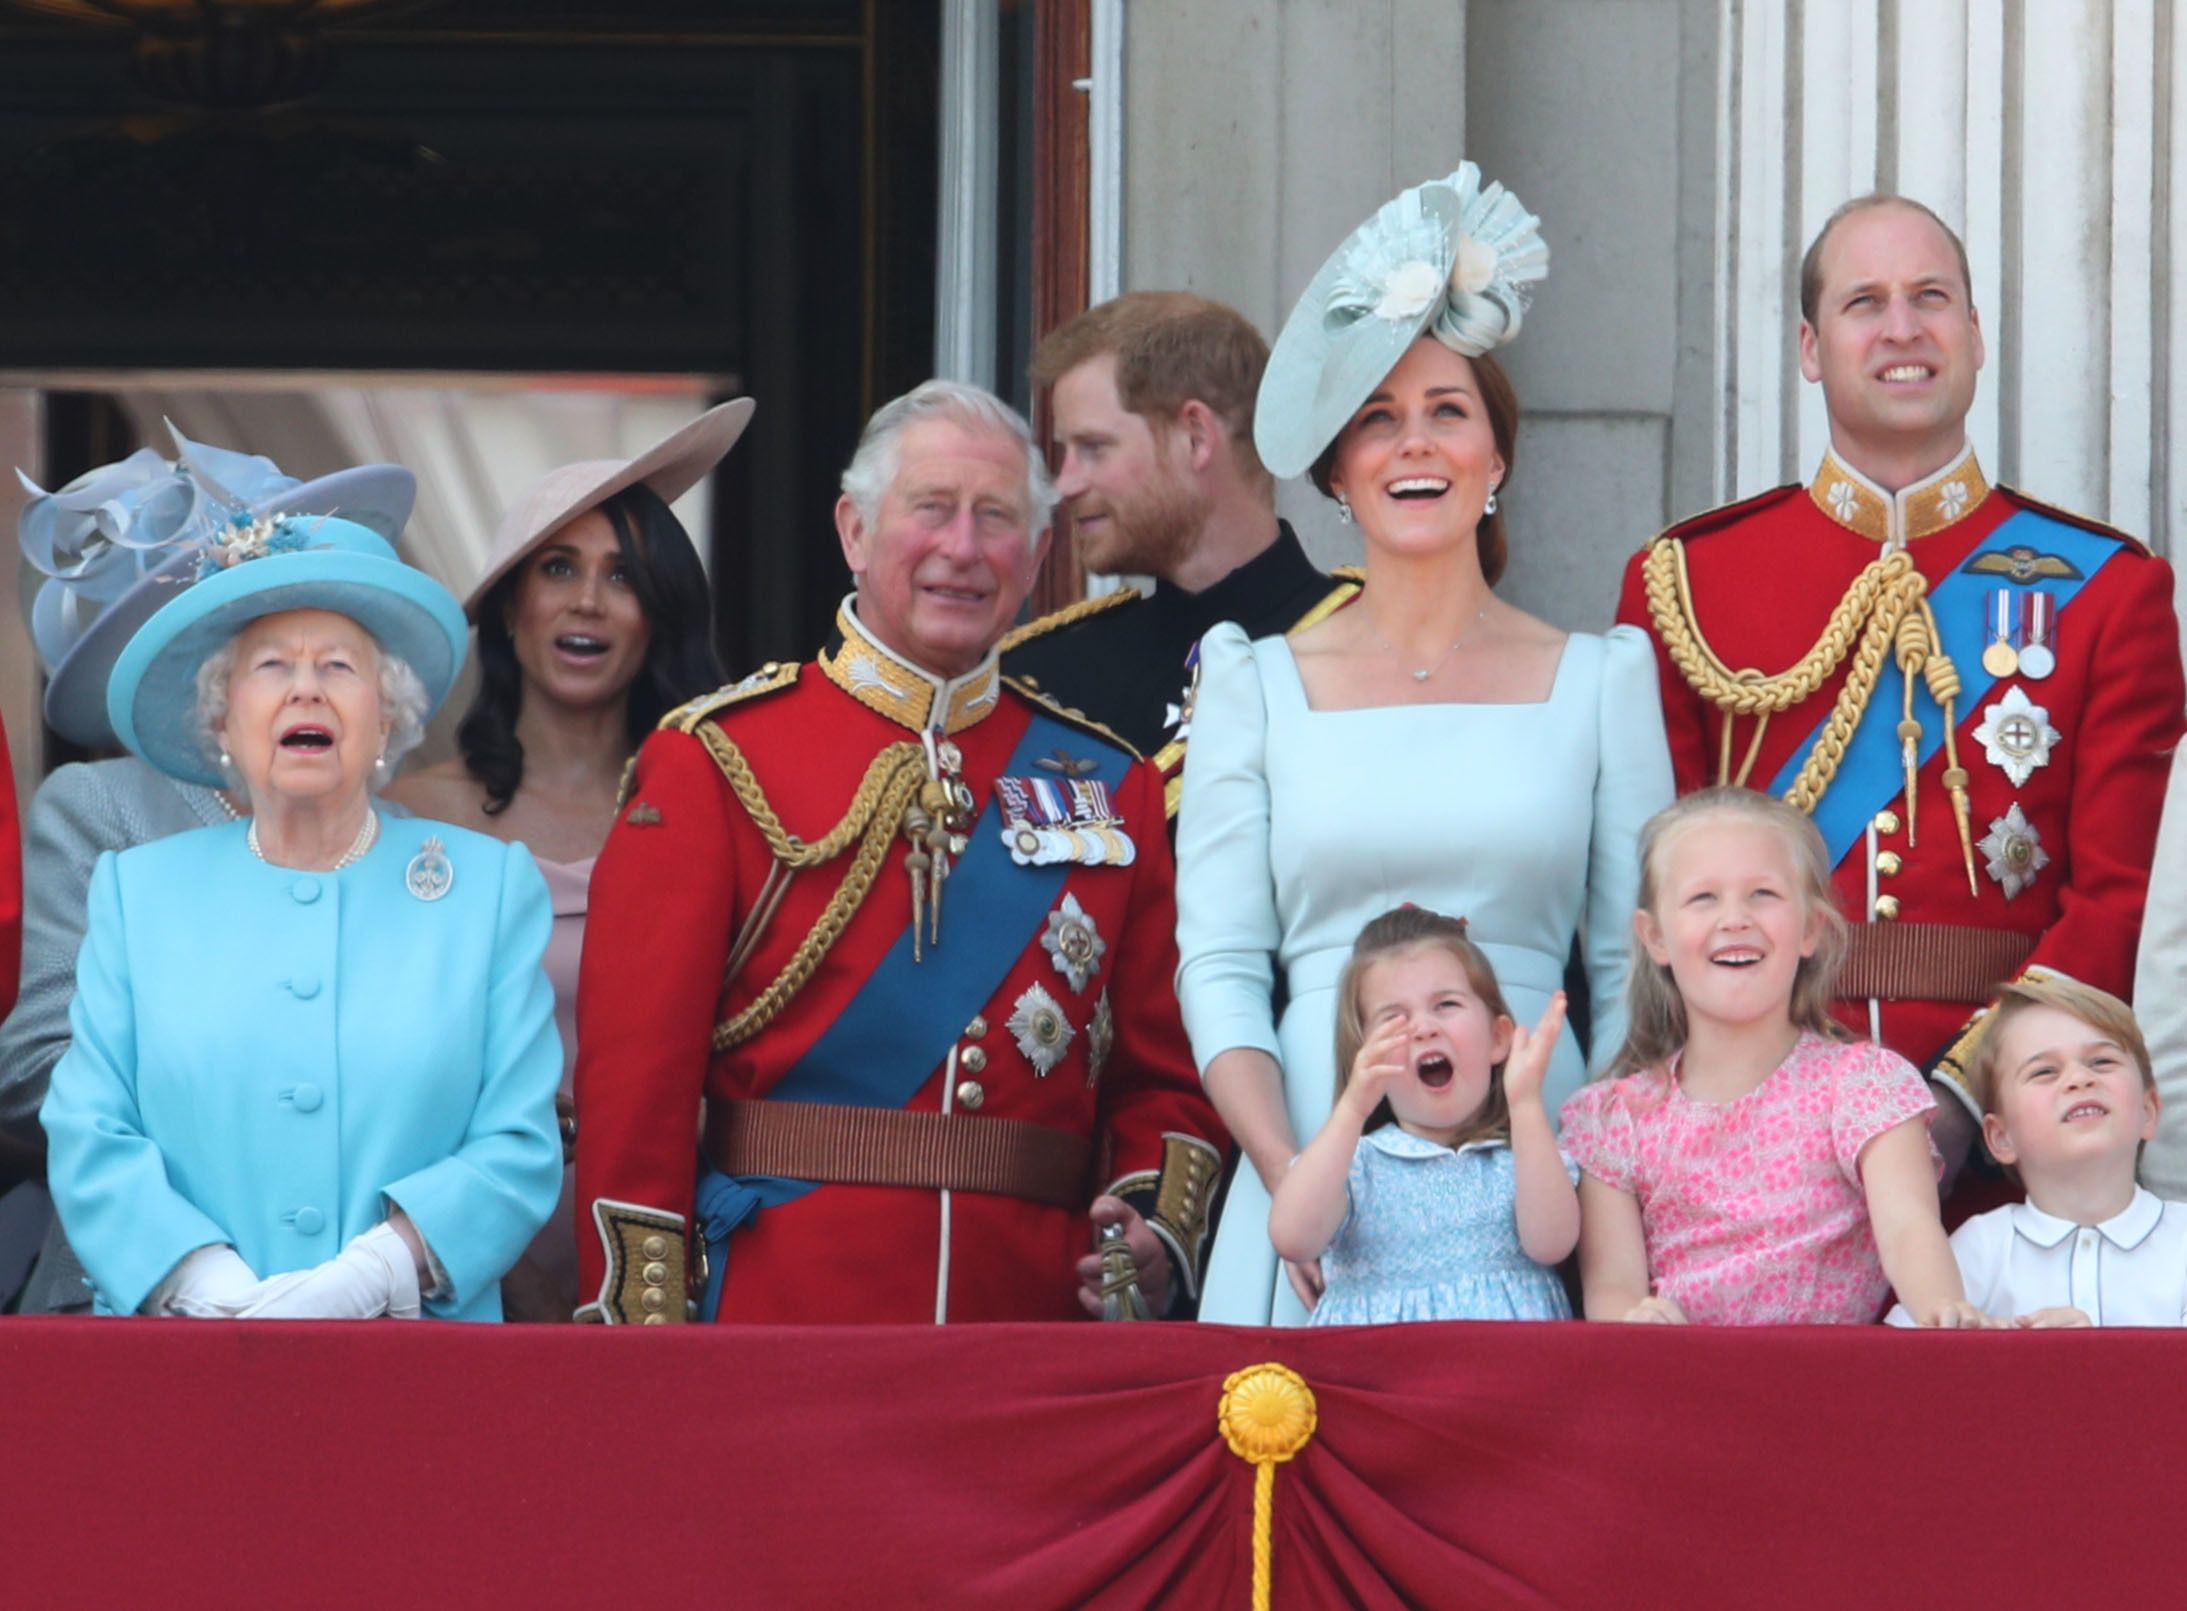 The Royal family on the balcony of Buckingham Palace, in central London,  June 09, 2018 | Photo: Getty Images